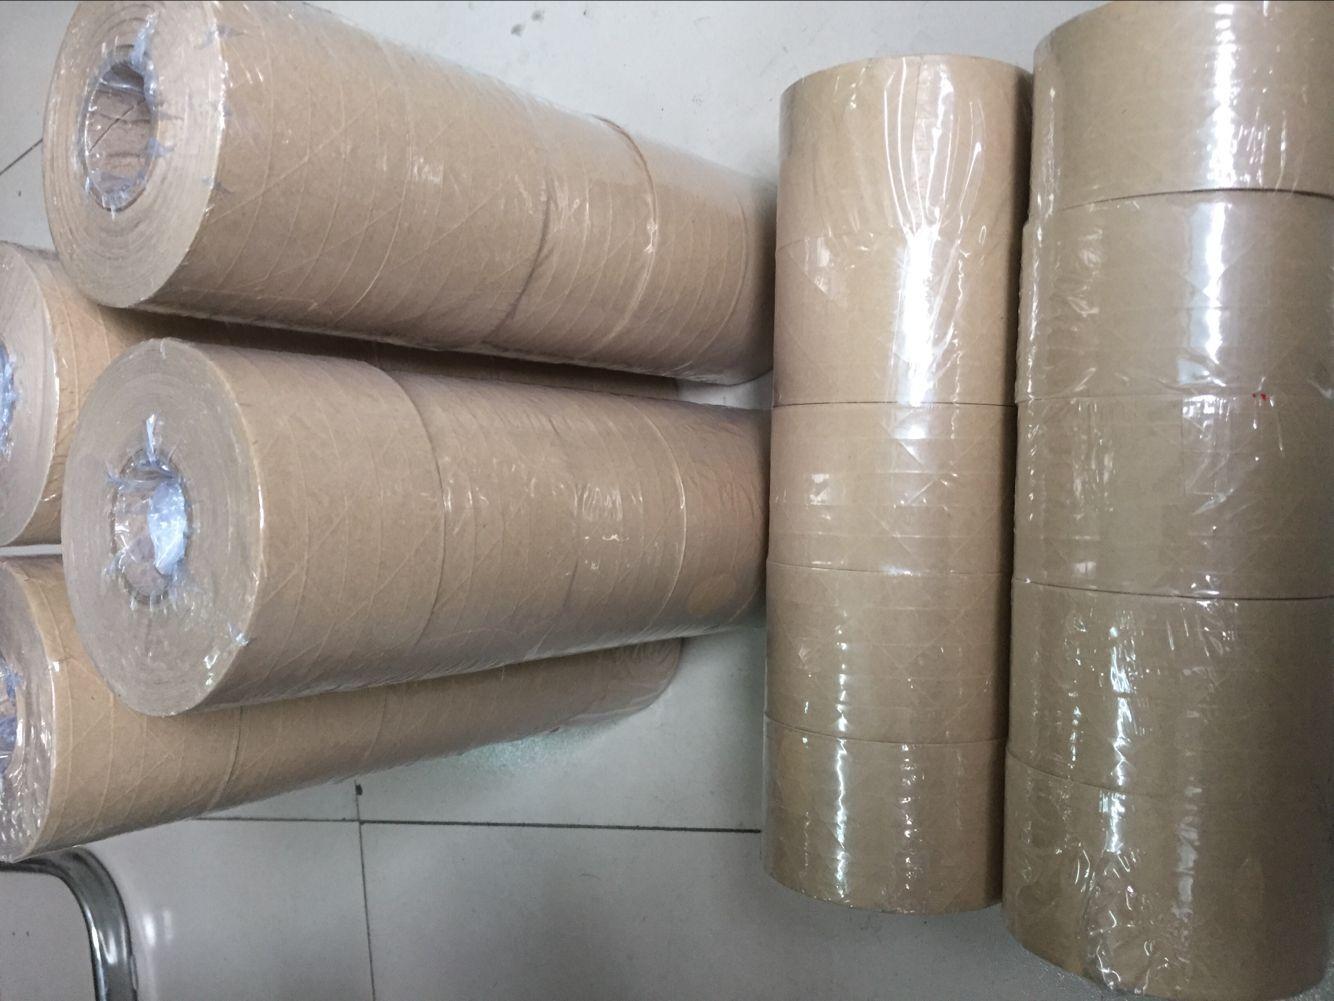 Moisture content and performance of wet water kraft paper tape